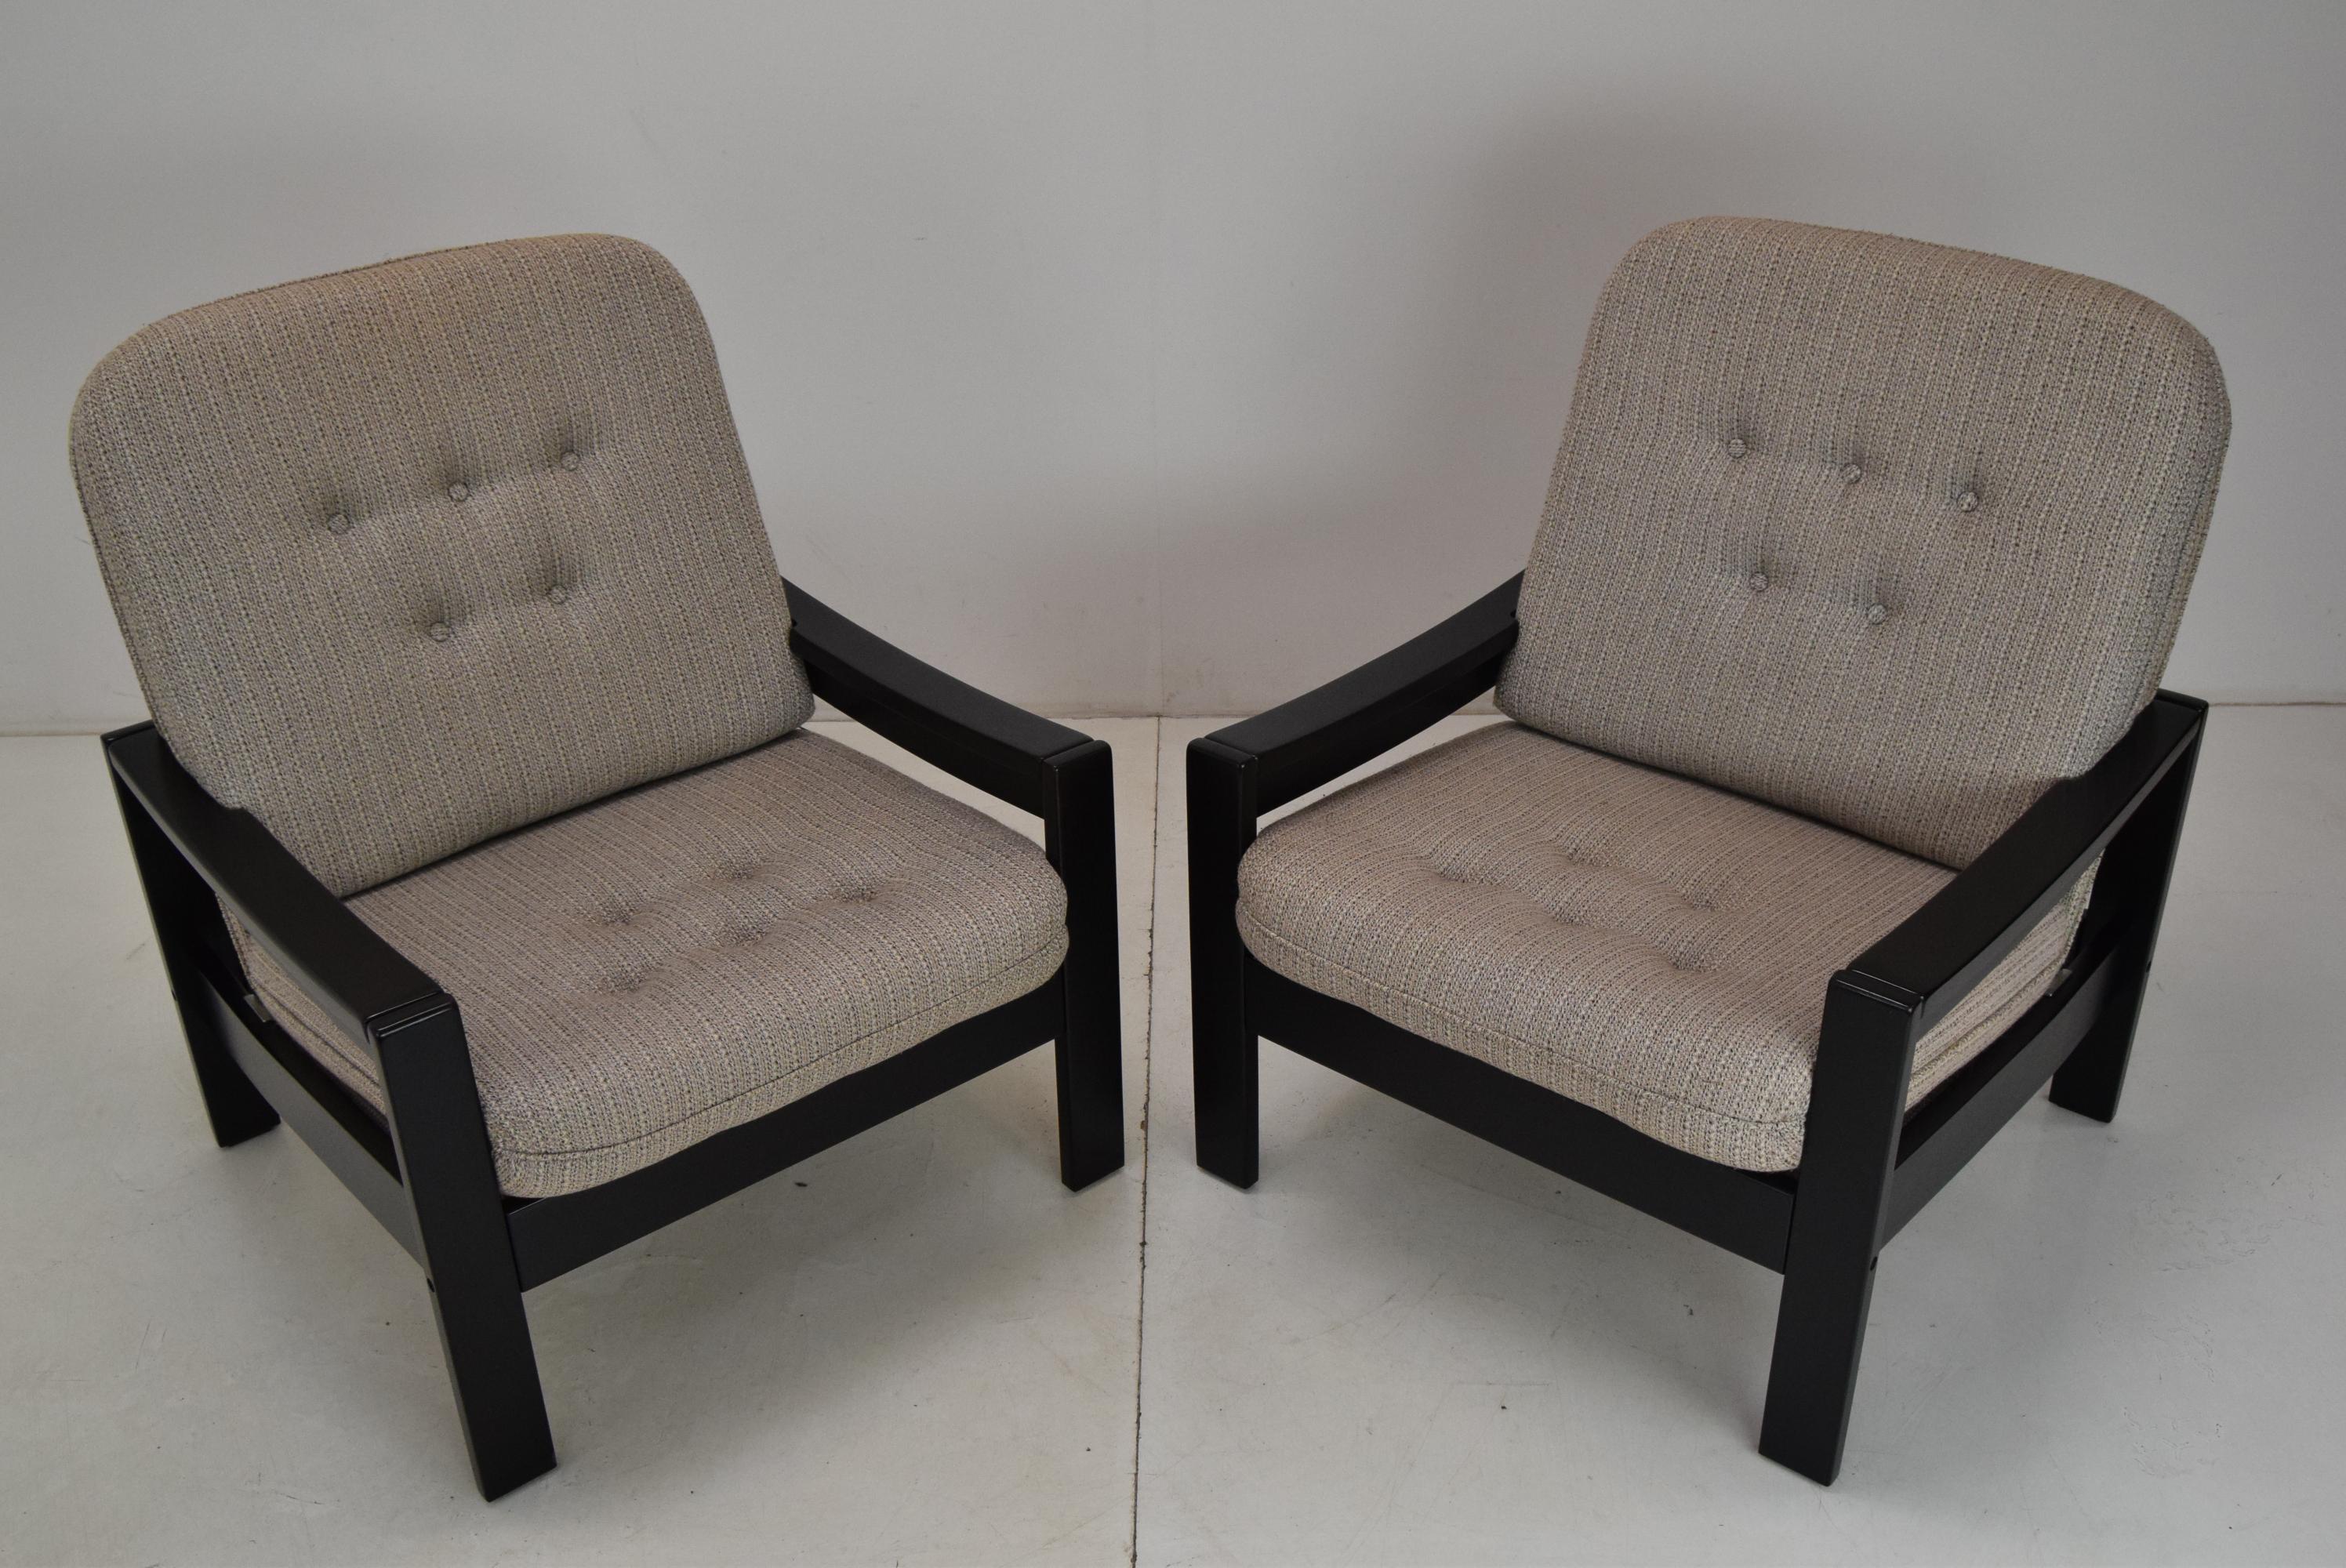 Two pieces in stock
Made in Czechoslovakia
Made of fabric,wood
Measures: Seat height 43cm
Manufacturer Hikor Písek
Good Original condition.